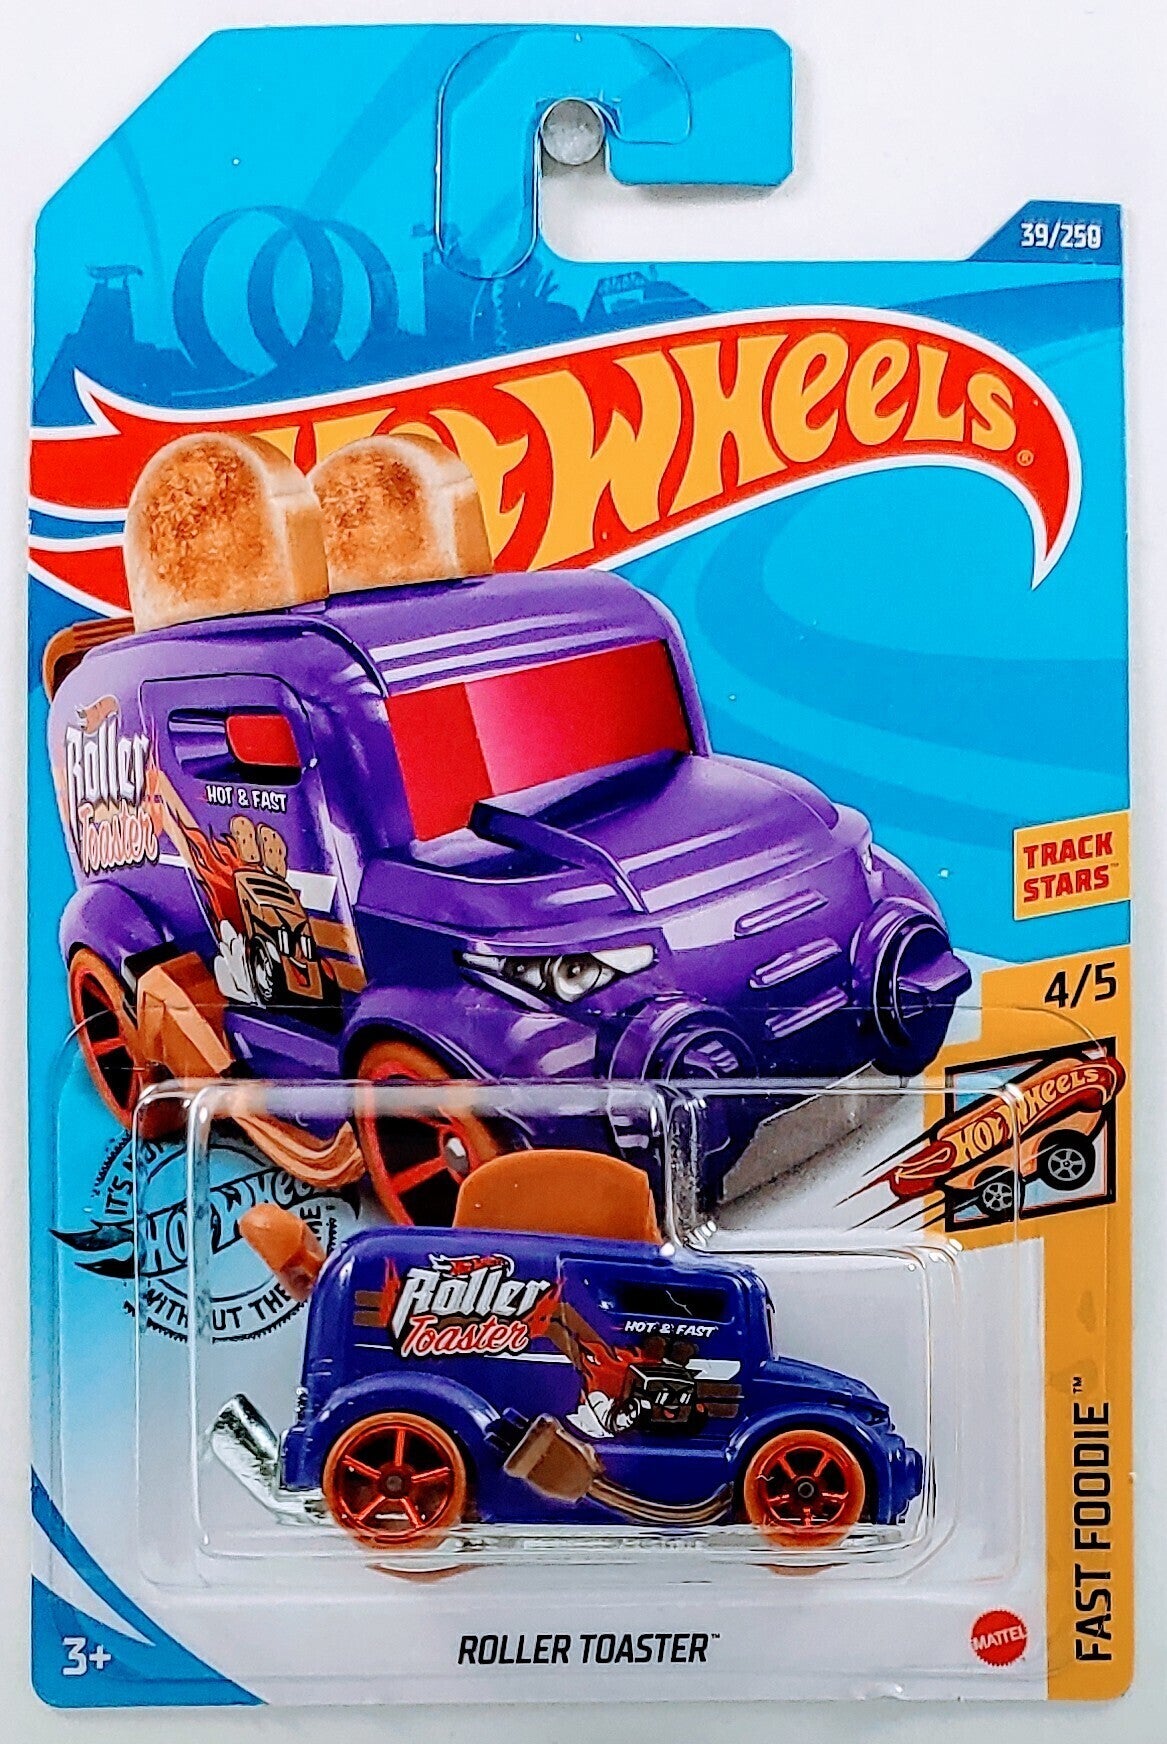 Hot Wheels 2020 - Collector # 039/250 - Fast Foodie 4/5 - Roller Toaster - Purple - IC